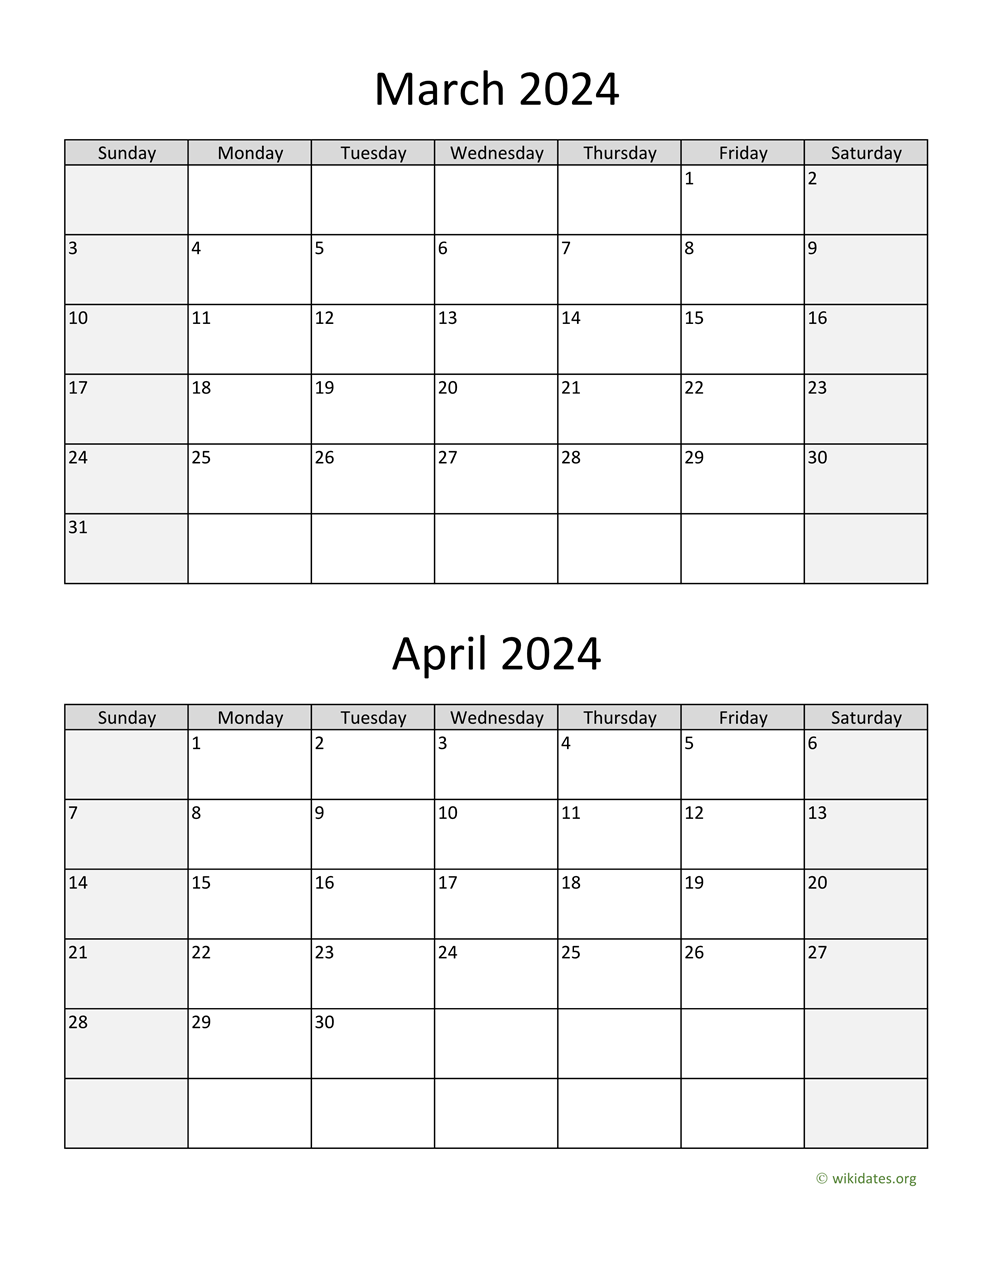 March And April 2024 Calendar | Wikidates for March April 2024 Calendar